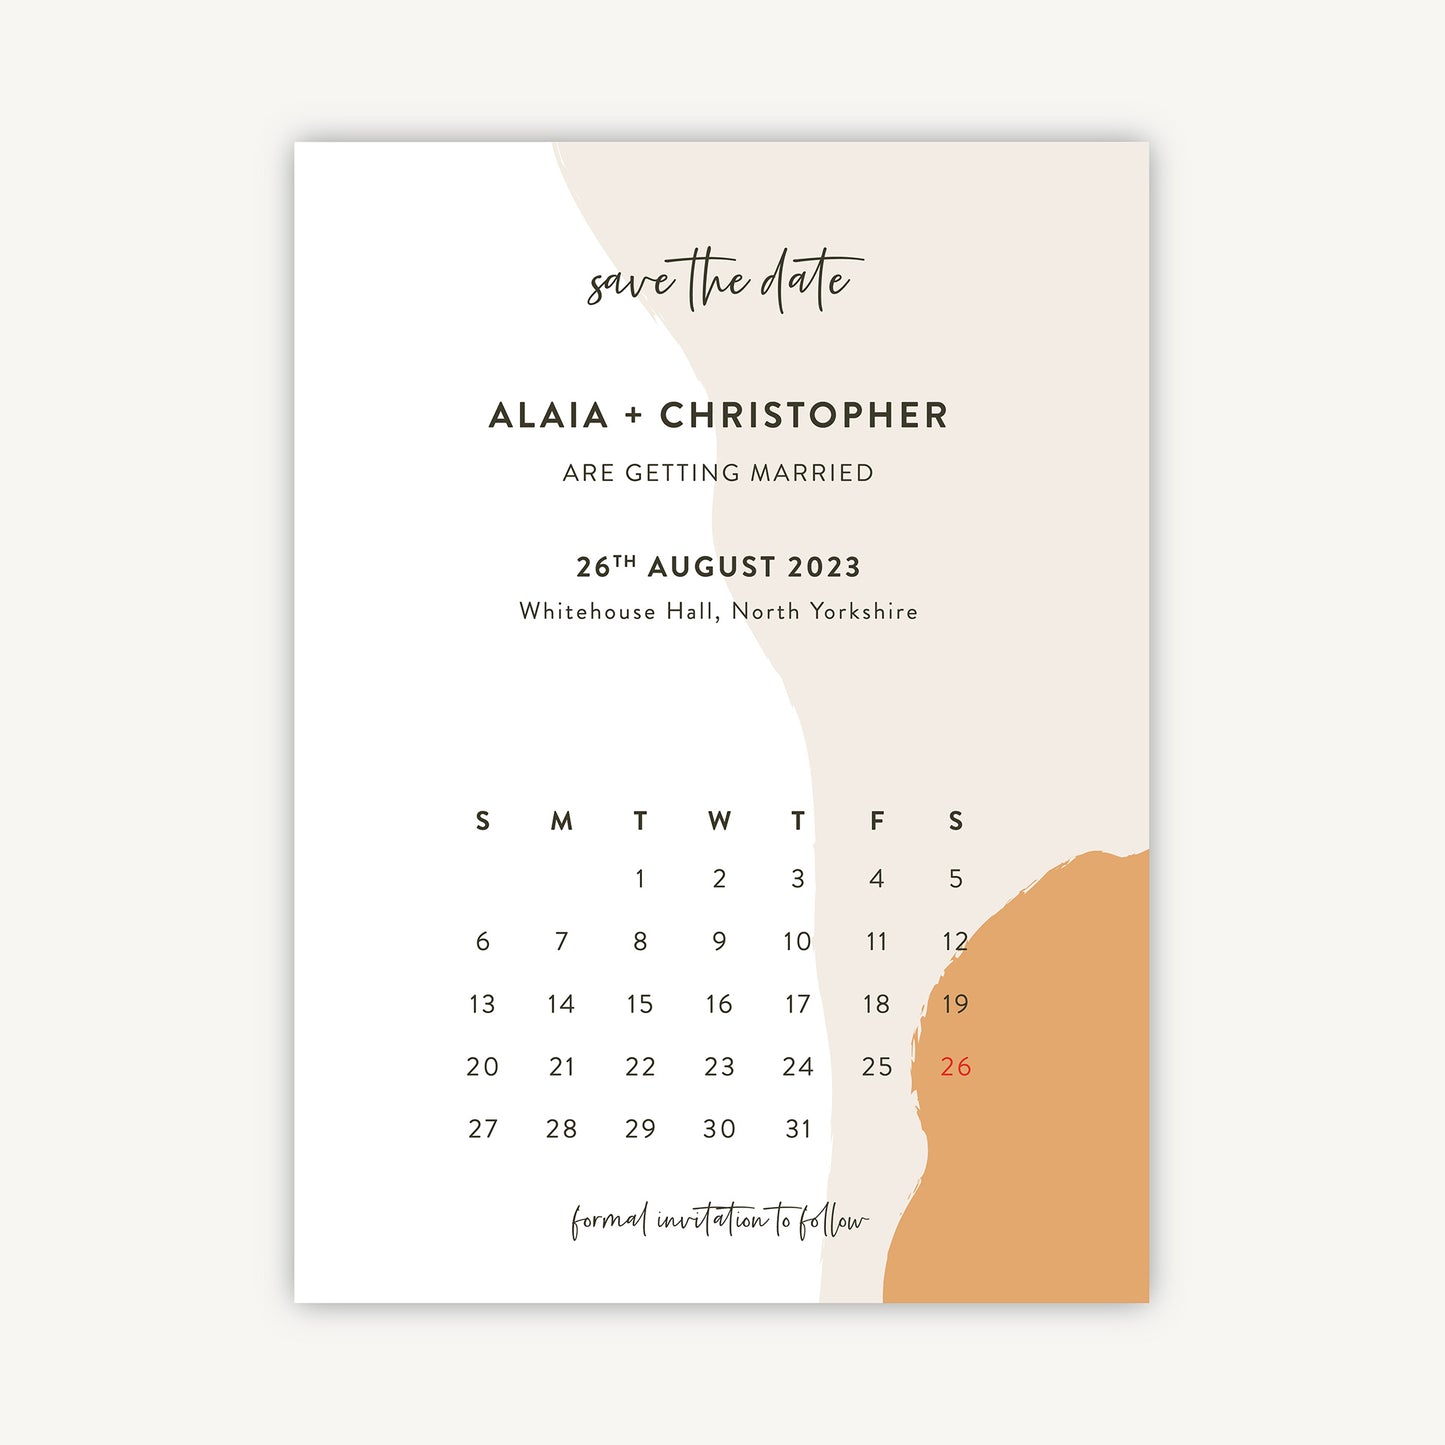 Painterly Colour Pop Folded Wedding Save the Date